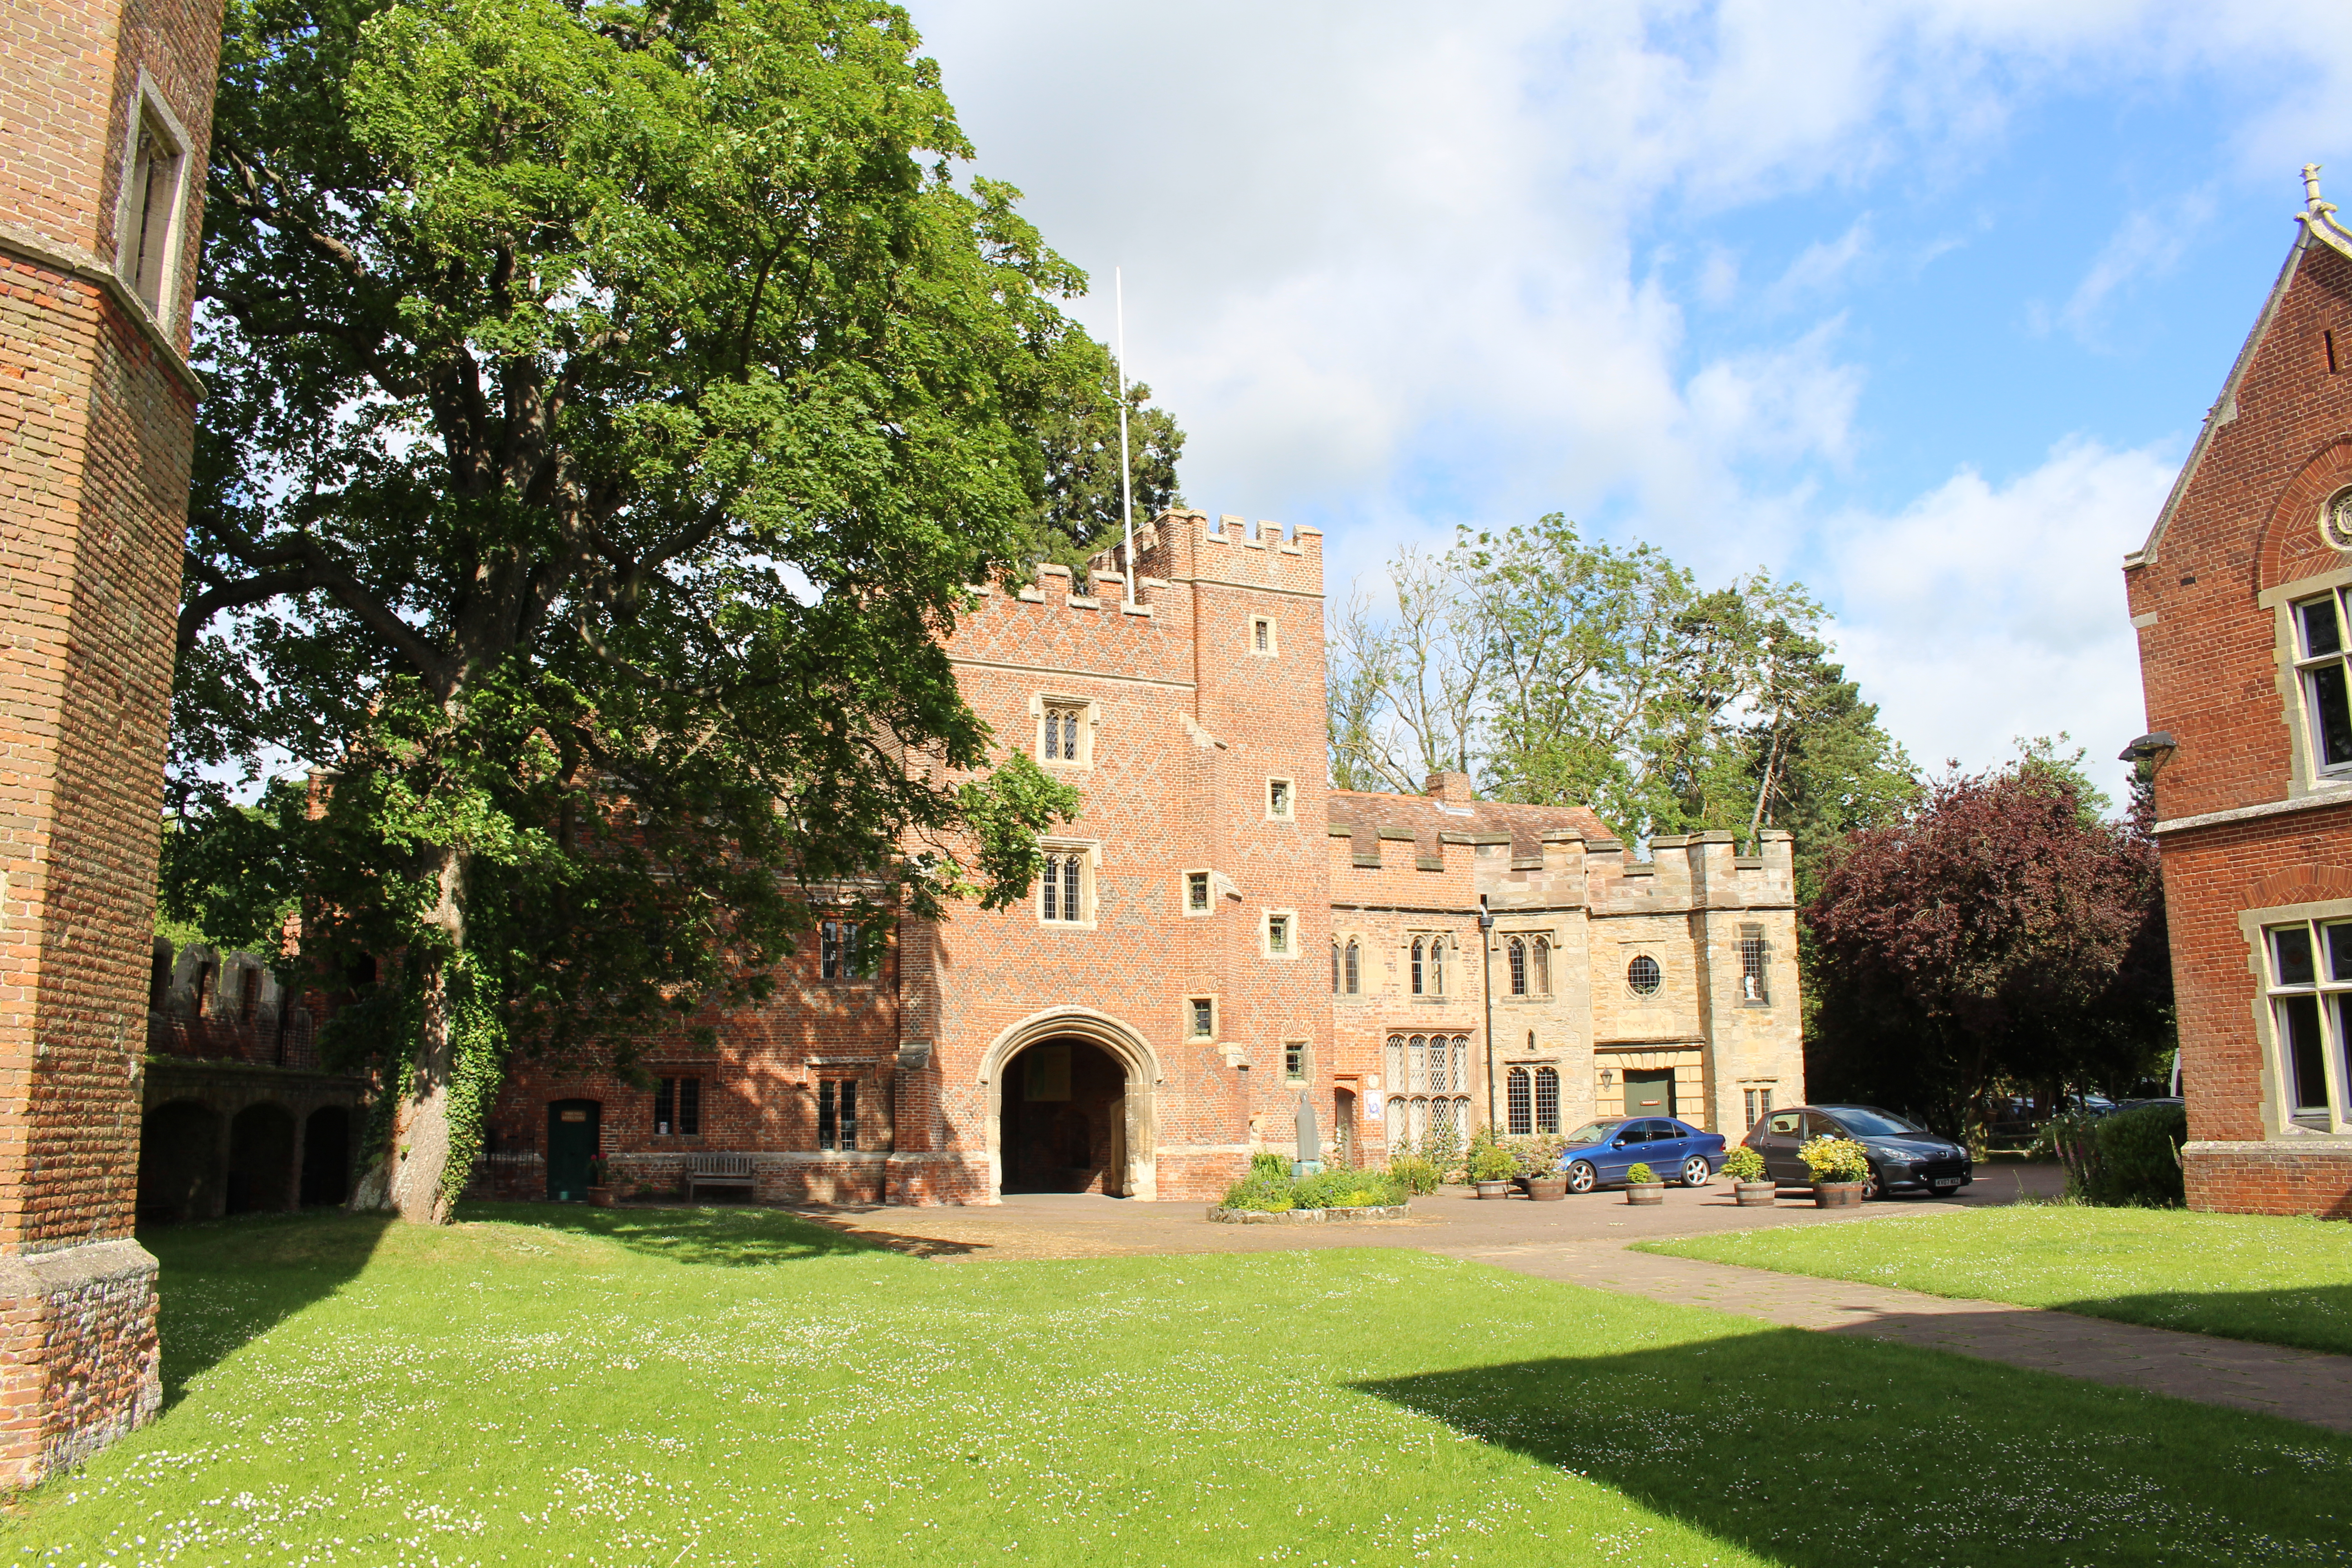 The Gatehouse from the inner courtyard of Buckden Palace